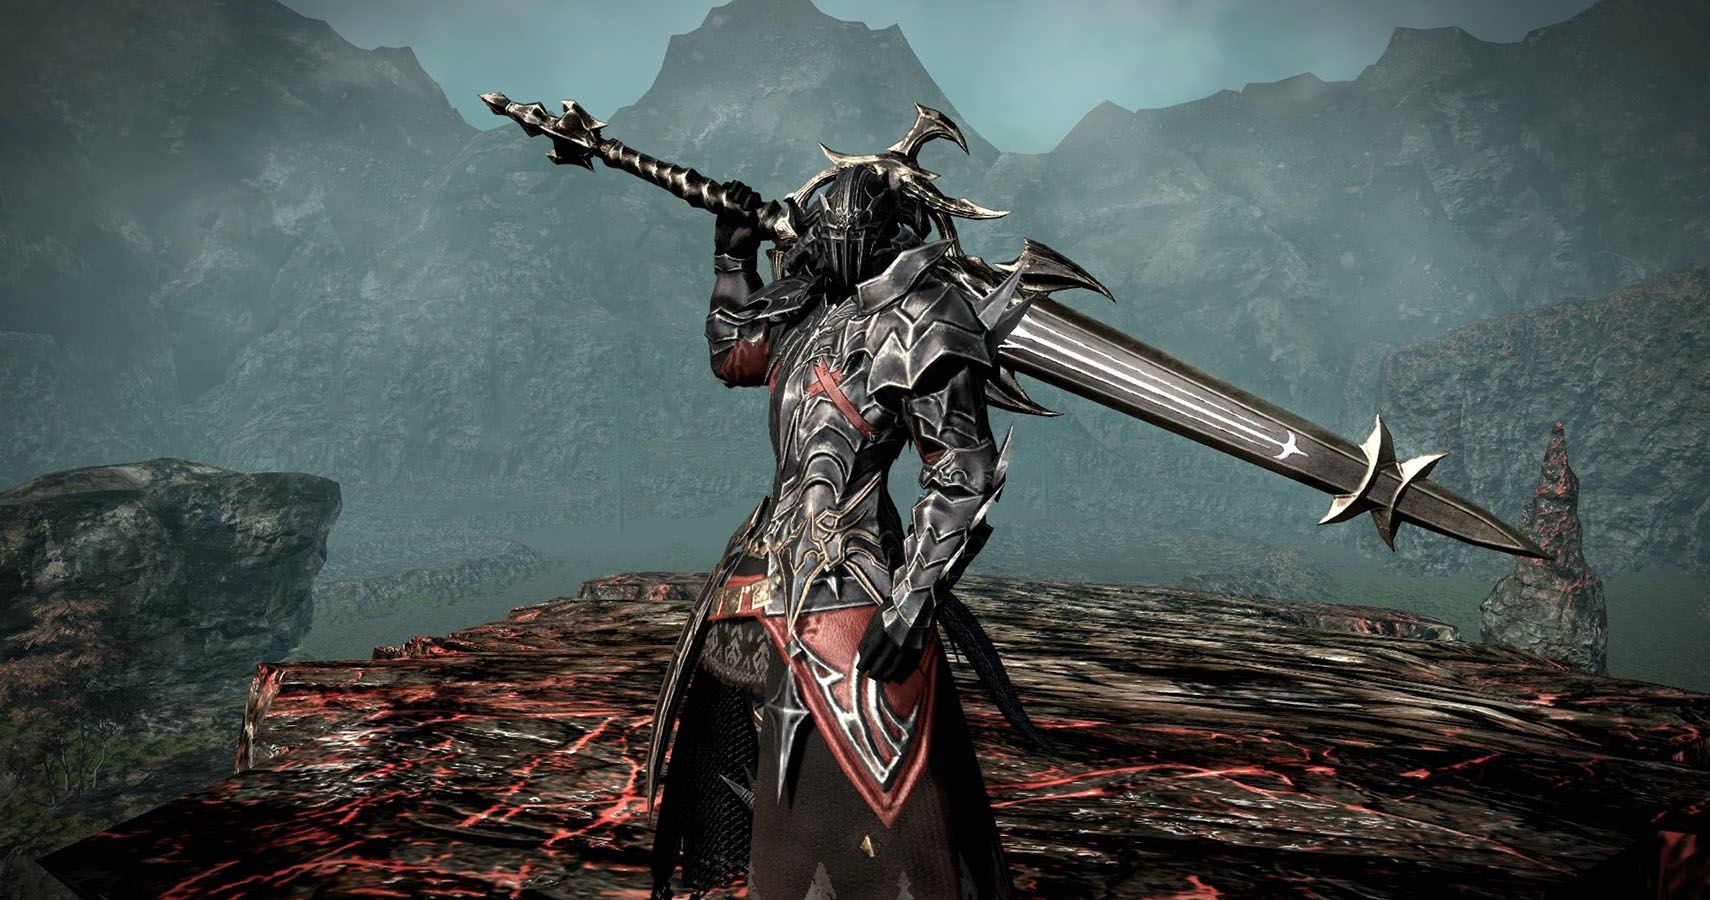 Final Fantasy Xiv Job Guide: 10 Pro Tips For Playing A Dark Knight